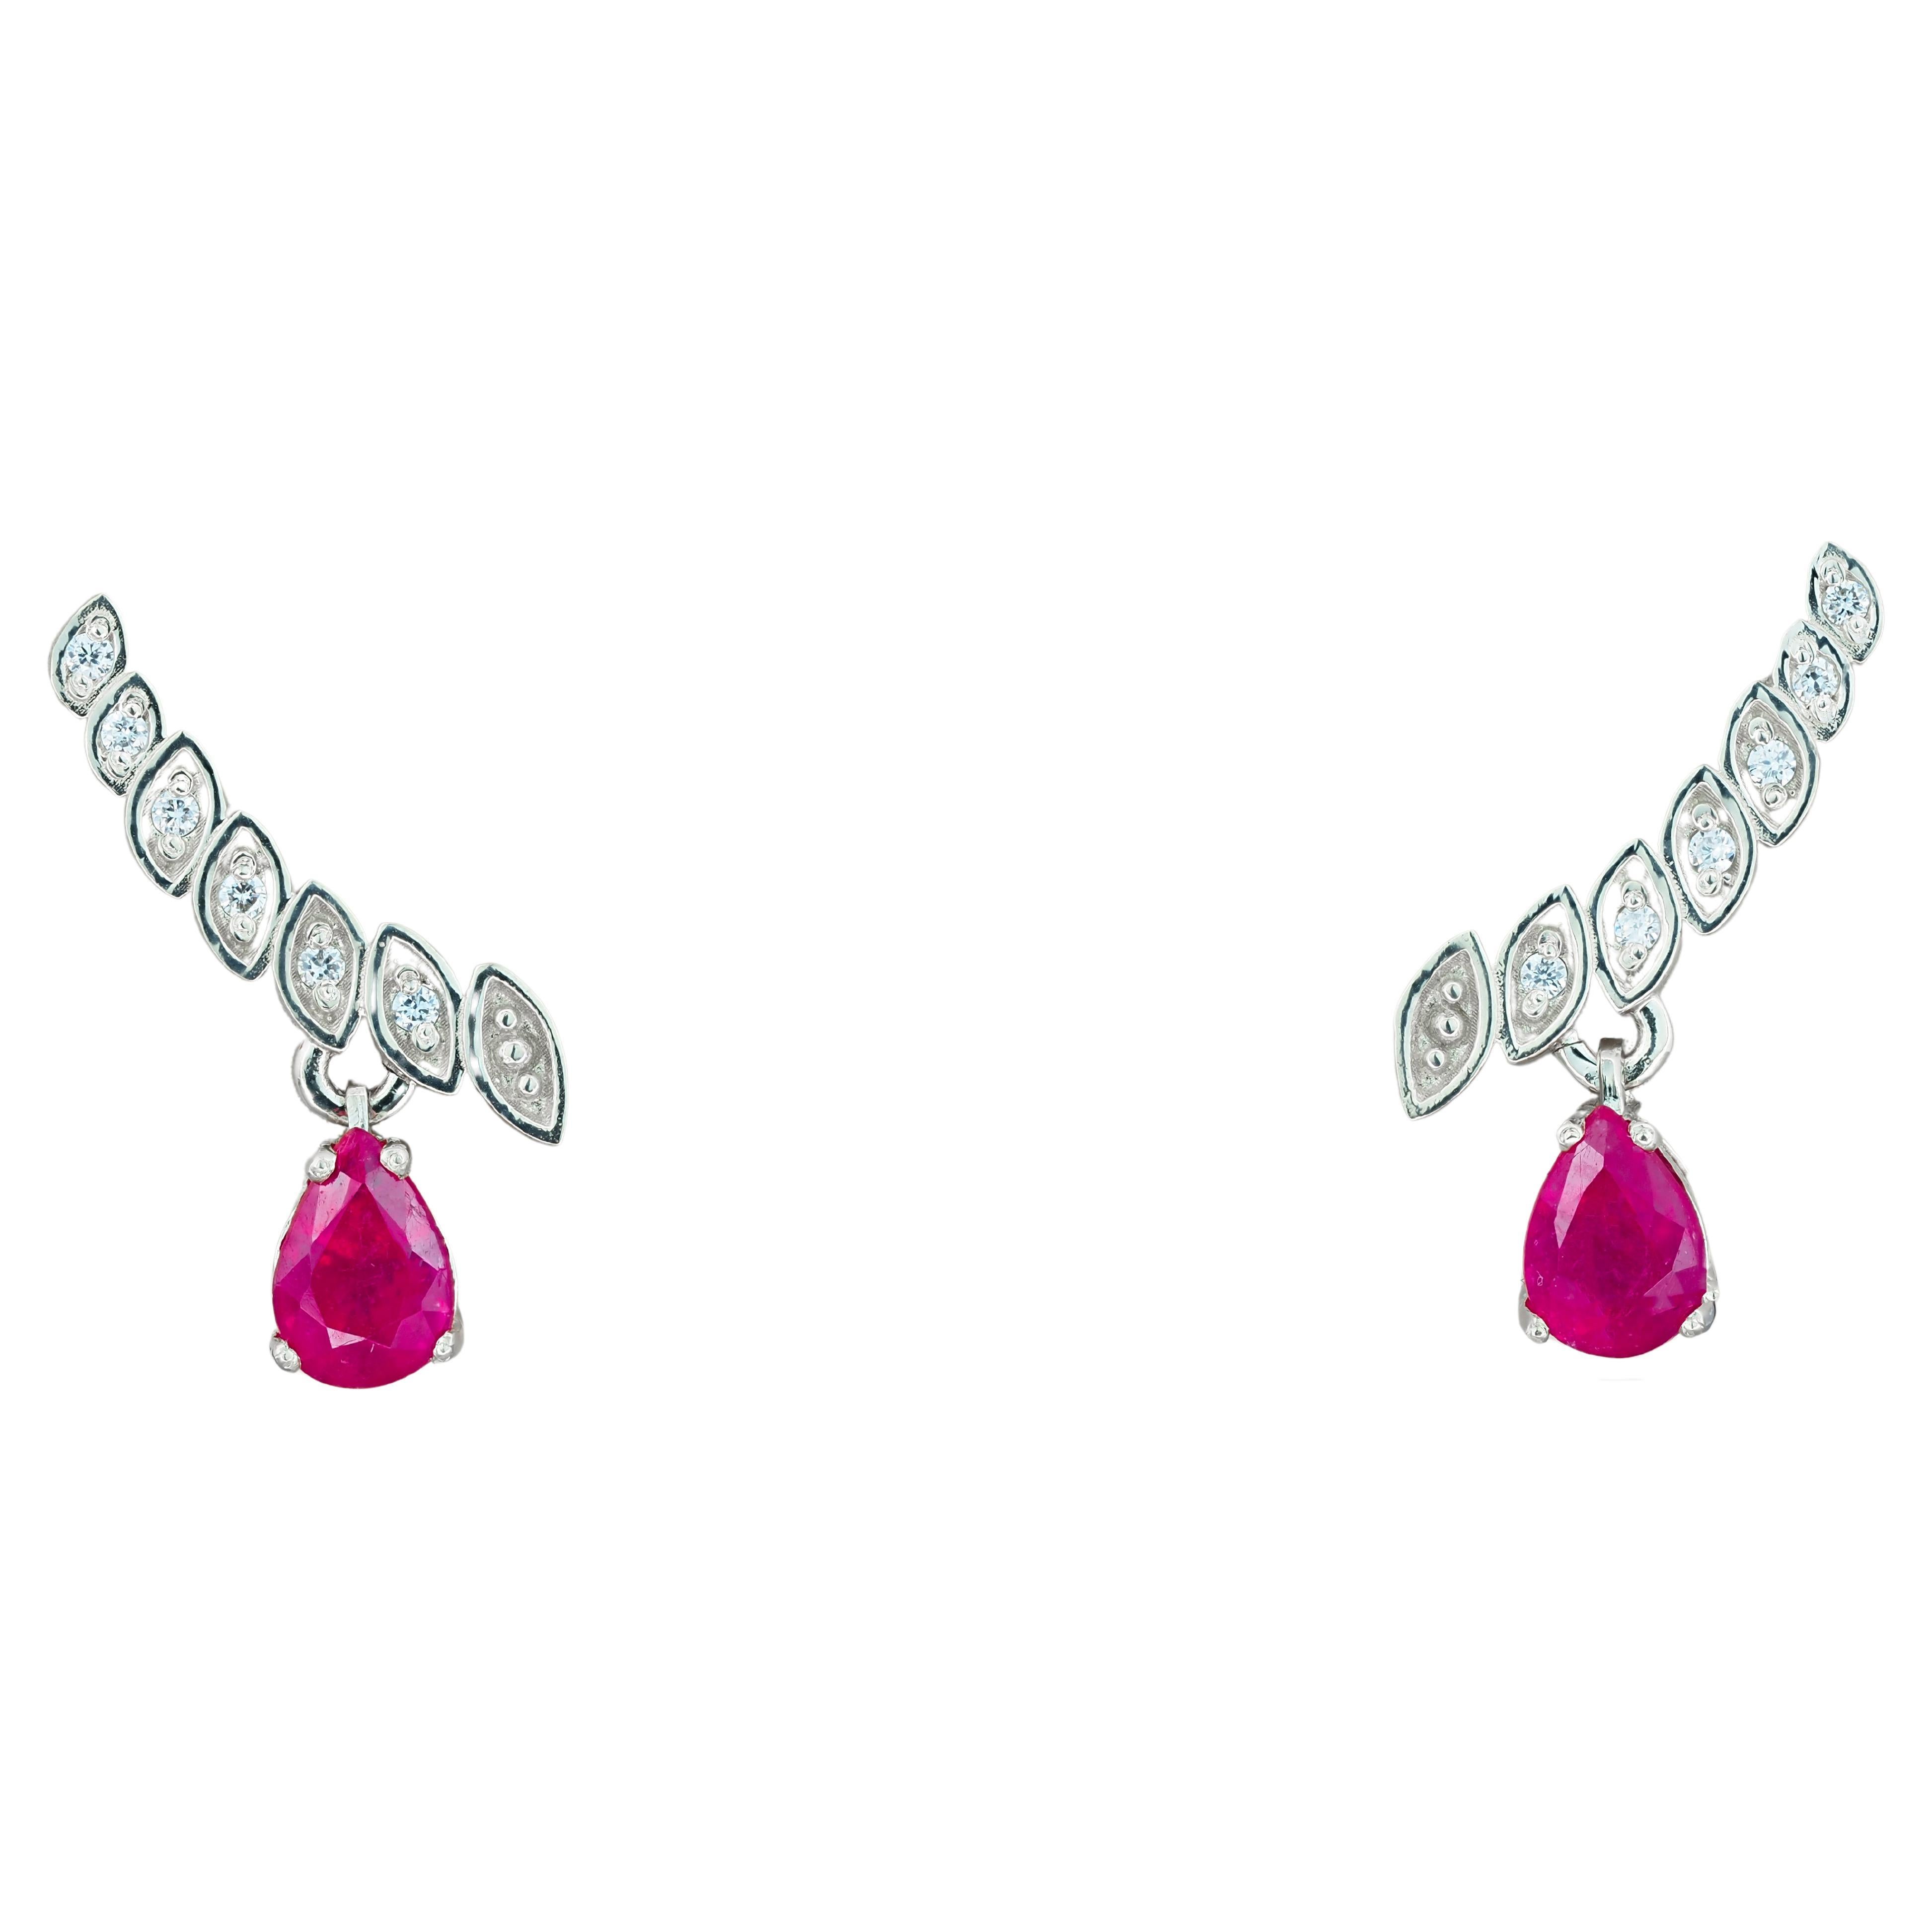 14k Gold Earrings with Pear Rubies and Diamonds! For Sale